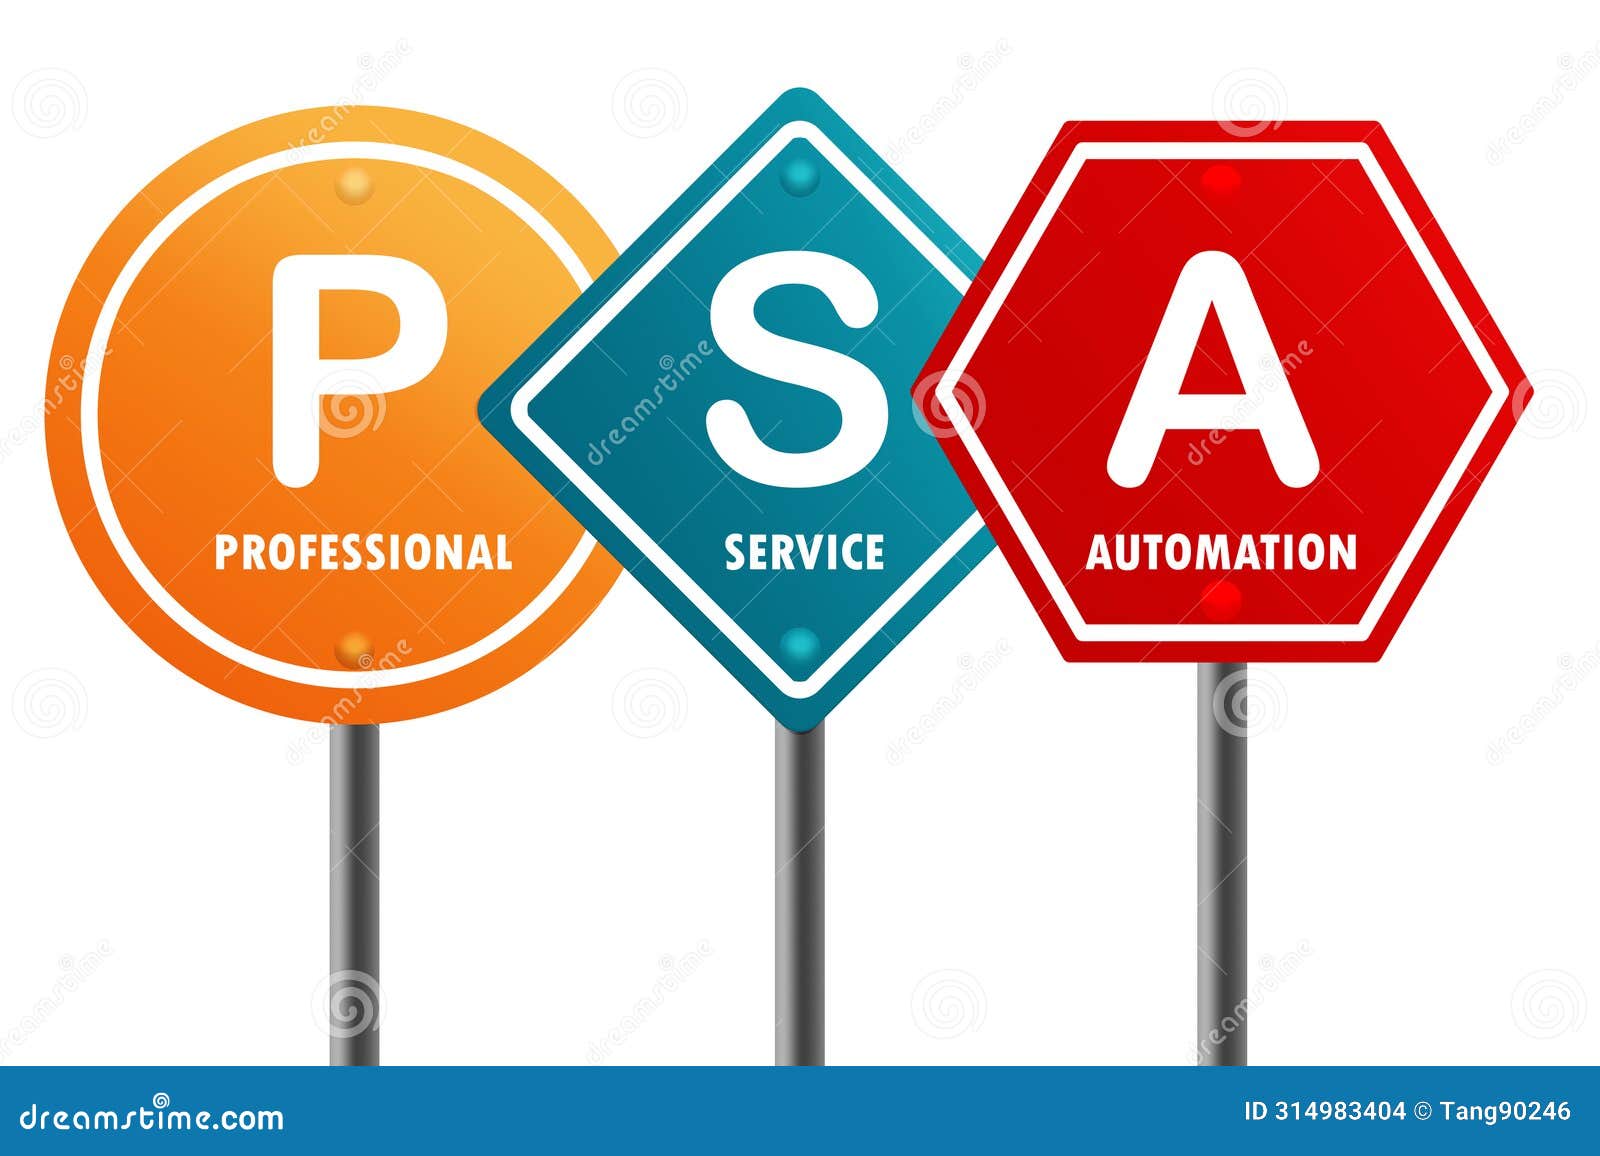 road sign with psa professional services administration word